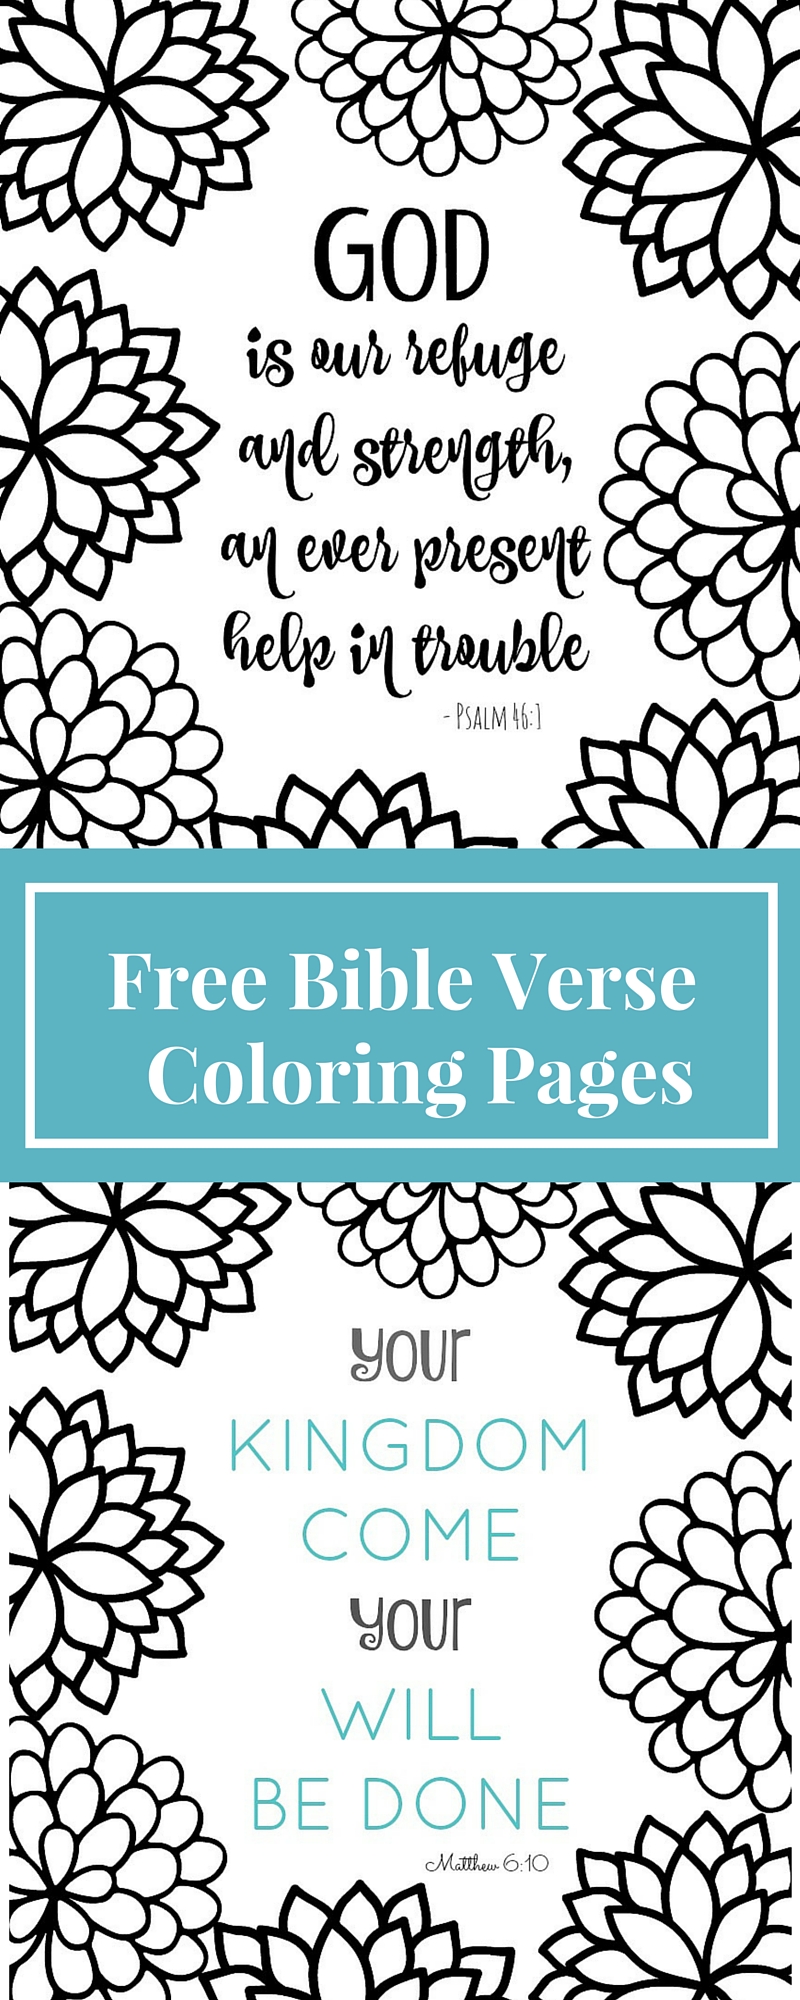 Coloring pages are for grown ups now These Bible verse coloring page printables are fun